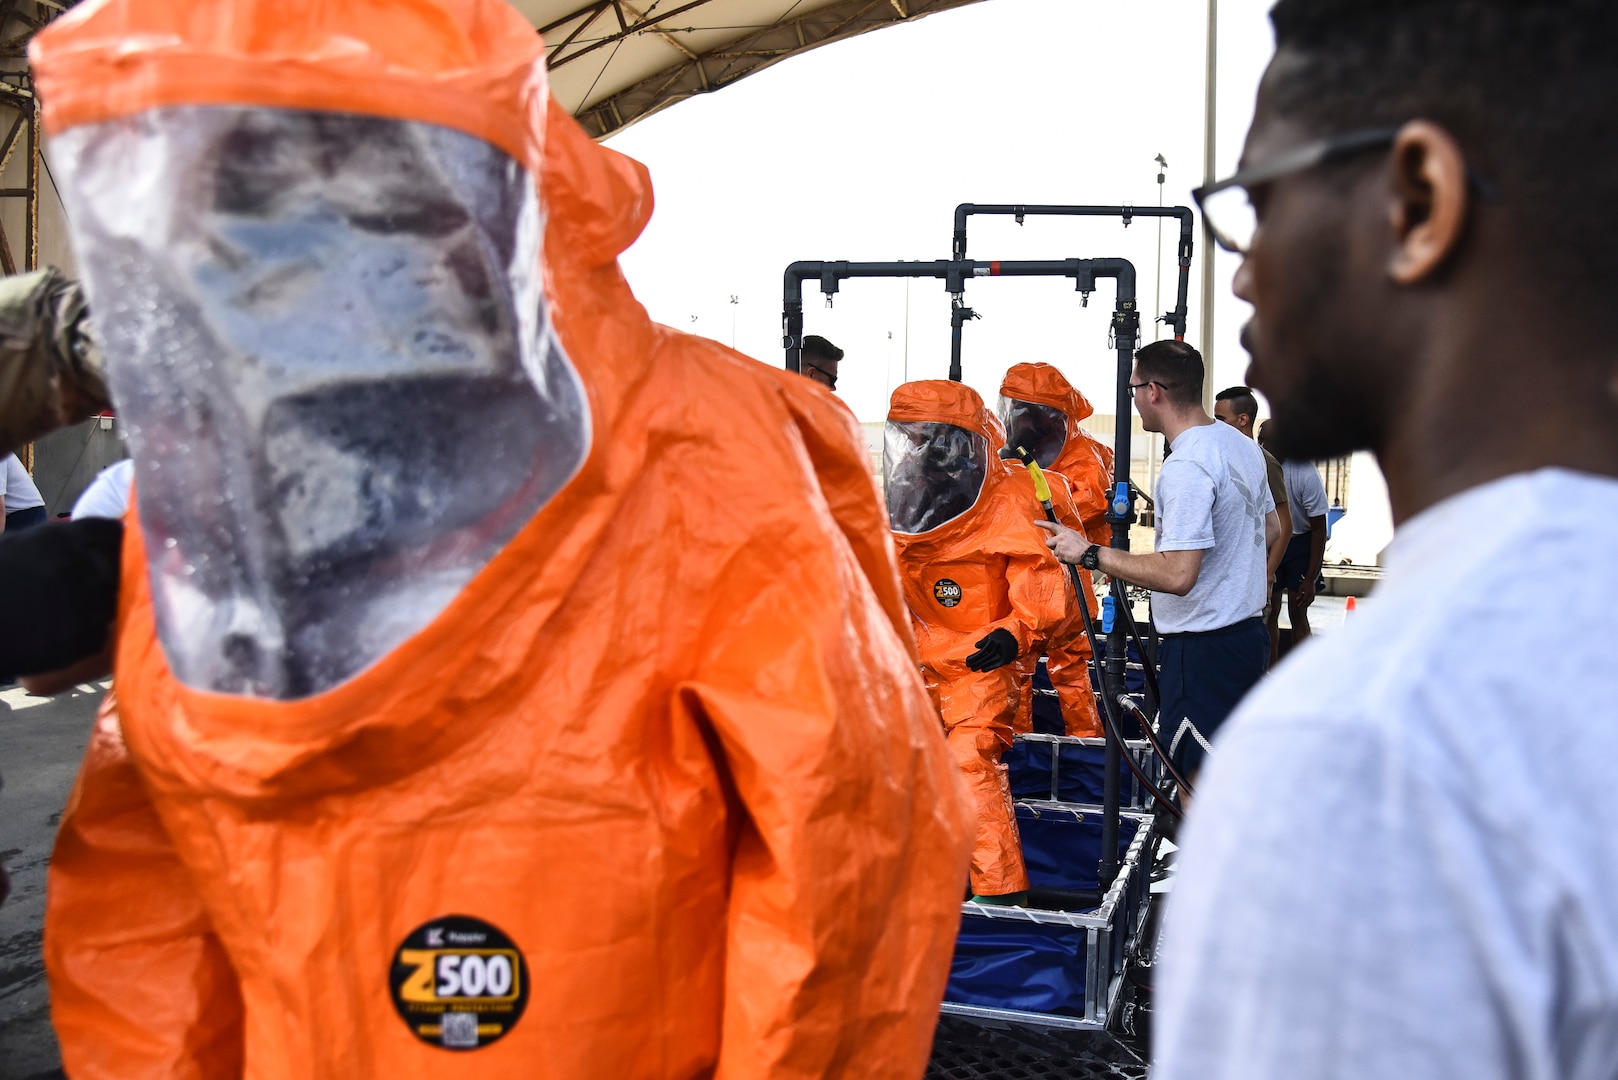 U.S. Airmen assigned to the 380th Expeditionary Civil Engineer Squadron Fire Department process through a technical decontamination during a hazardous materials exercise at Al Dhafra Air Base, United Arab Emirates, Jan. 4, 2019. The 380th ECES Fire Department and Emergency Management flights conducted a joint-agency hazardous material exercise for training purposes. (U.S. Air Force photo by Senior Airman Mya M. Crosby)